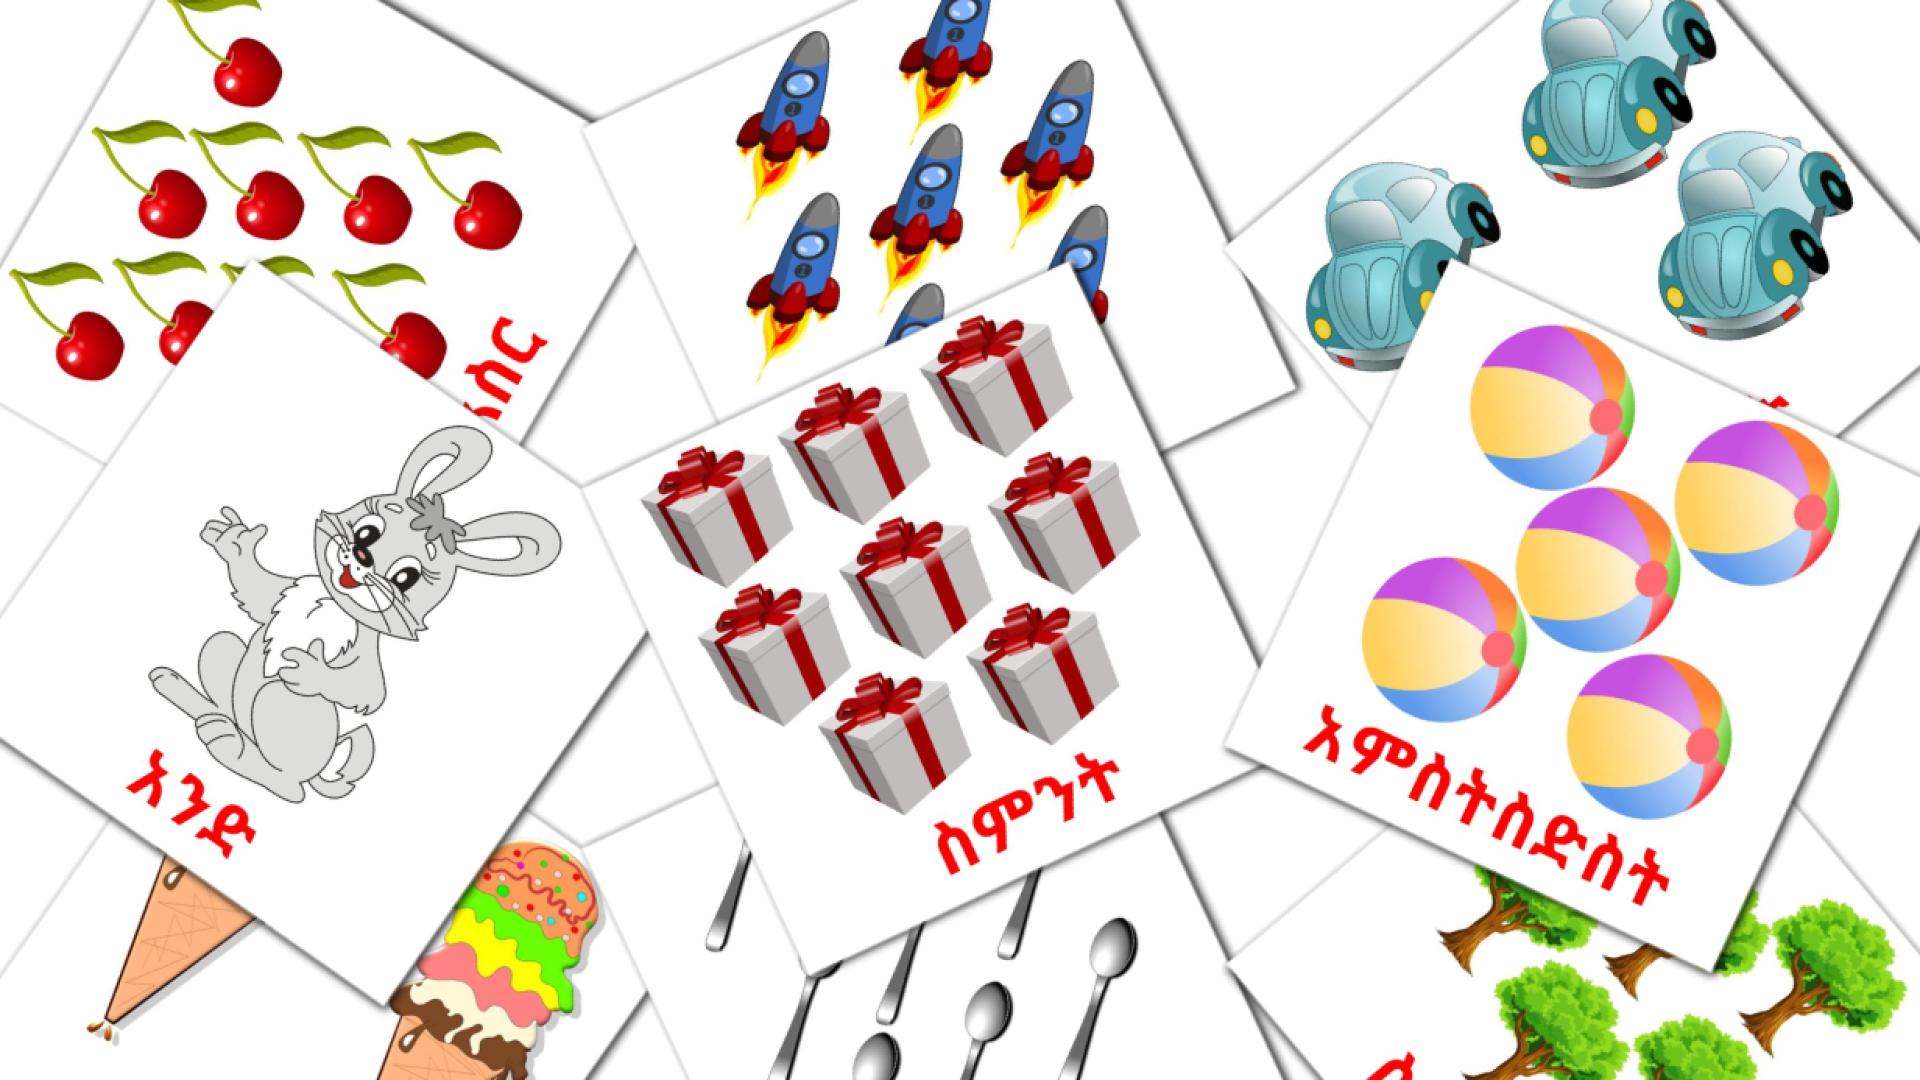 Counting - amharic vocabulary cards